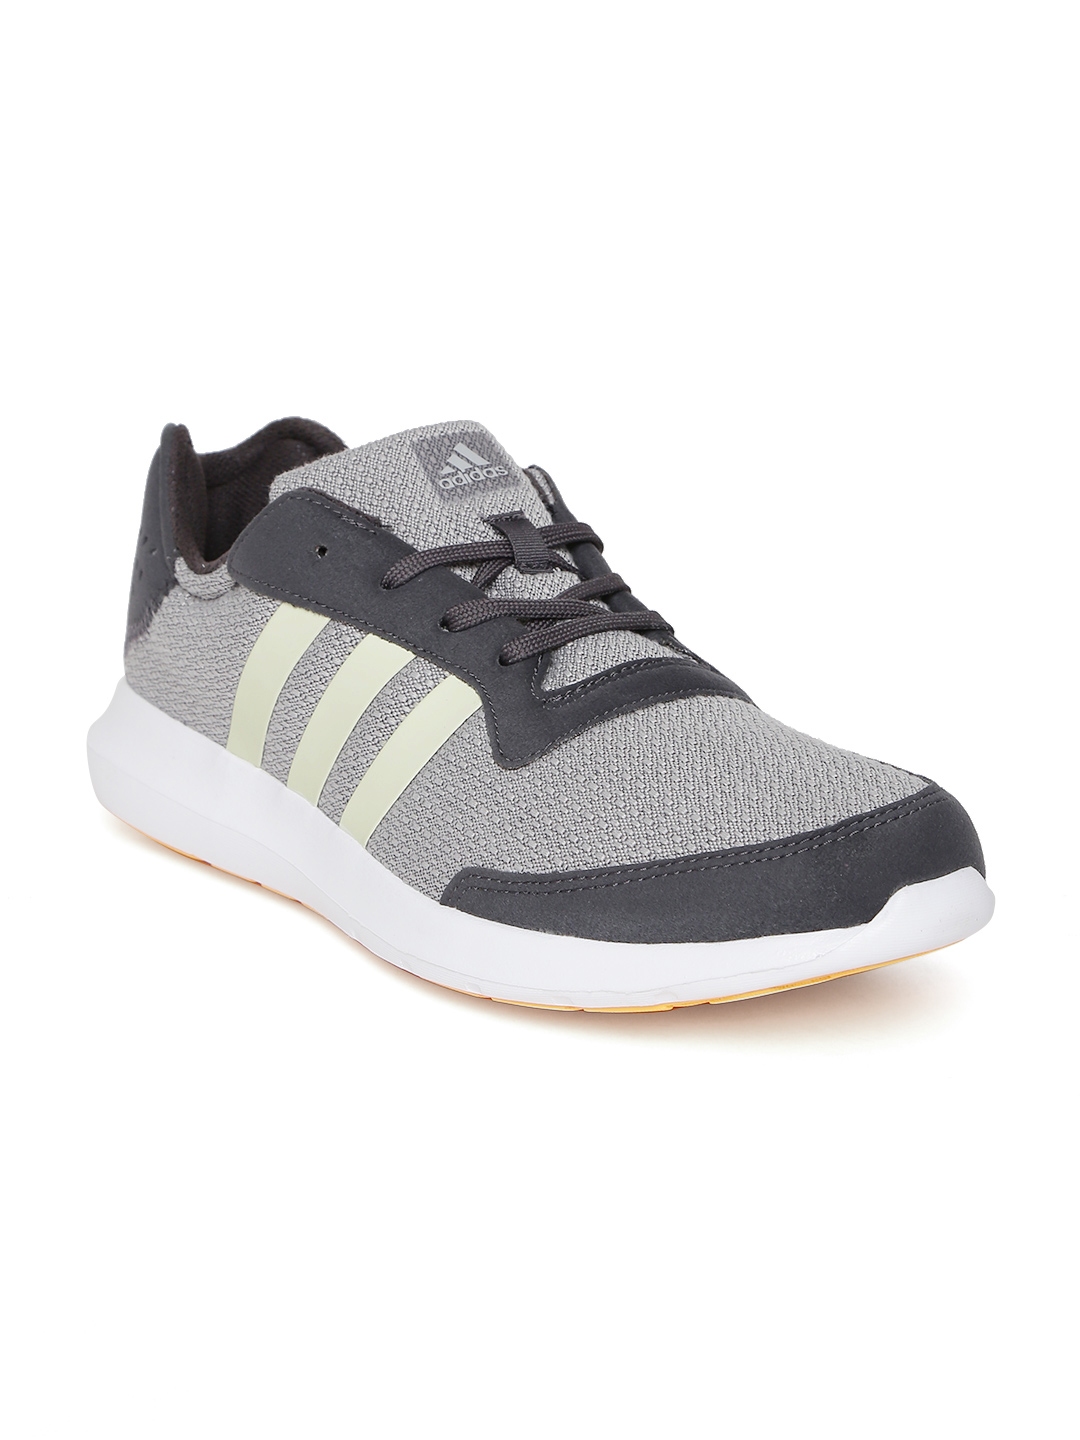 Buy ADIDAS Men Grey Element Refresh 2.1 Running Shoes - Sports Shoes ...